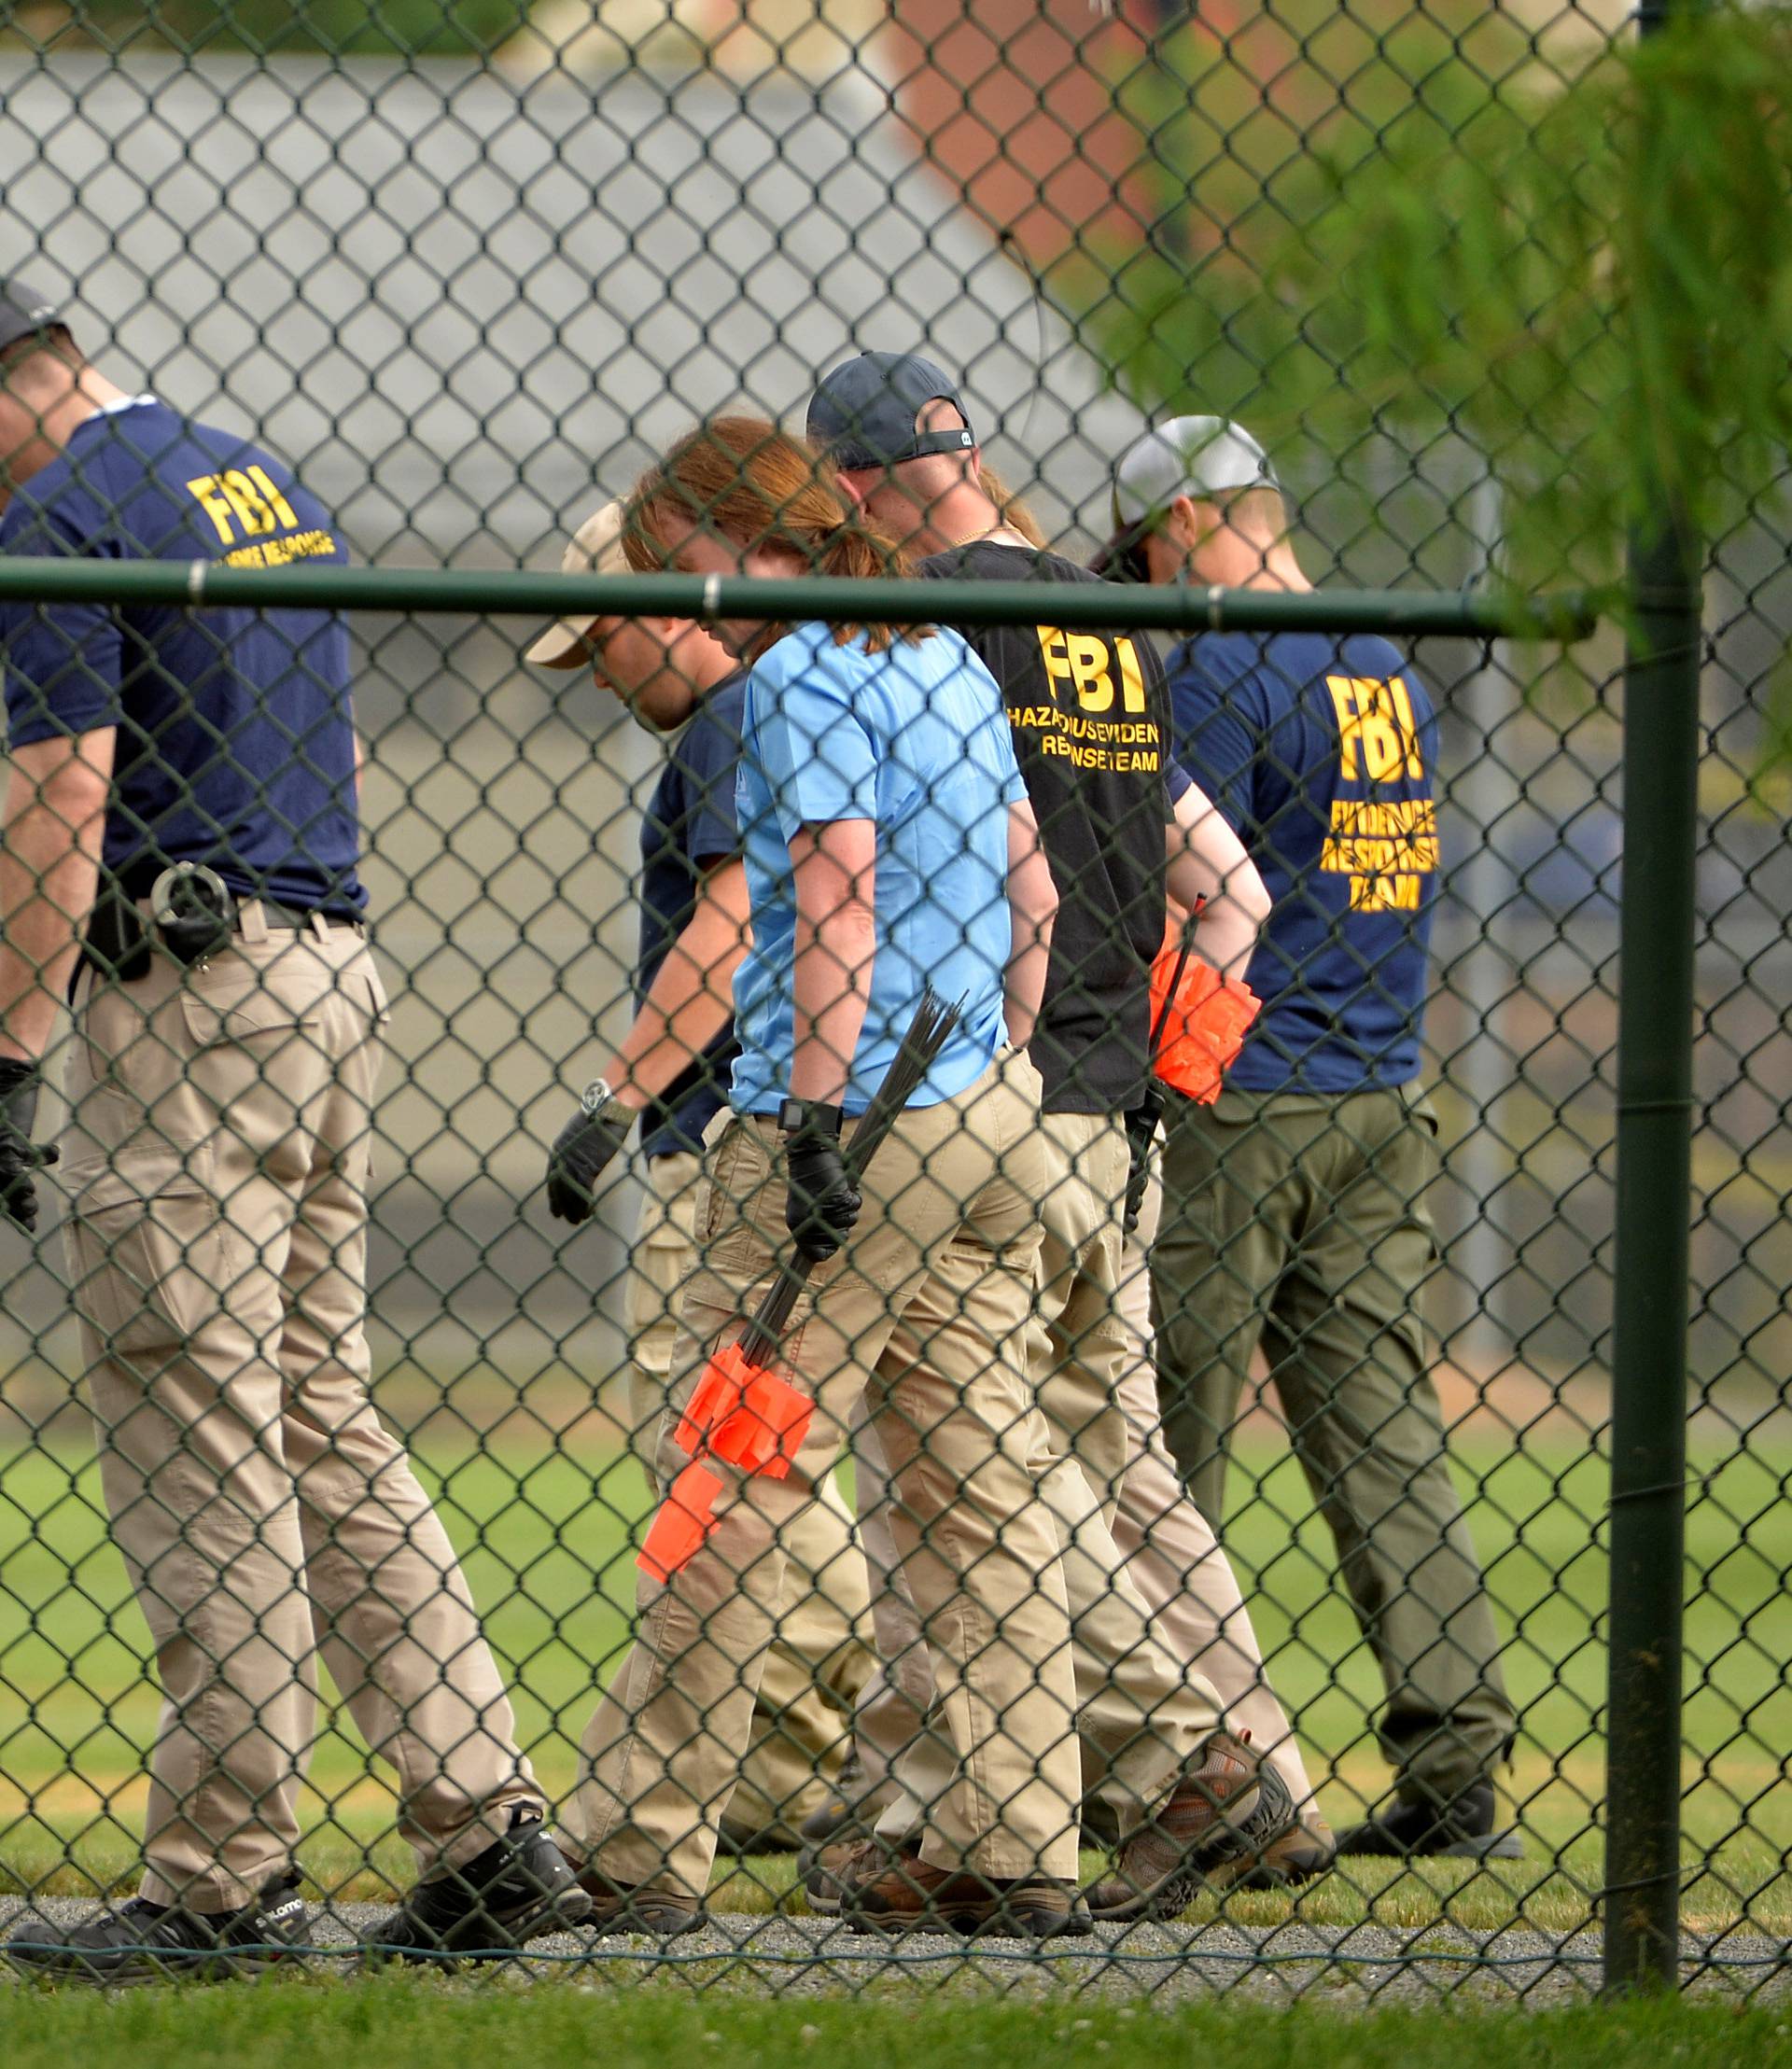 FBI technicians examine playing field at scene of shooting of Congressional baseball practice